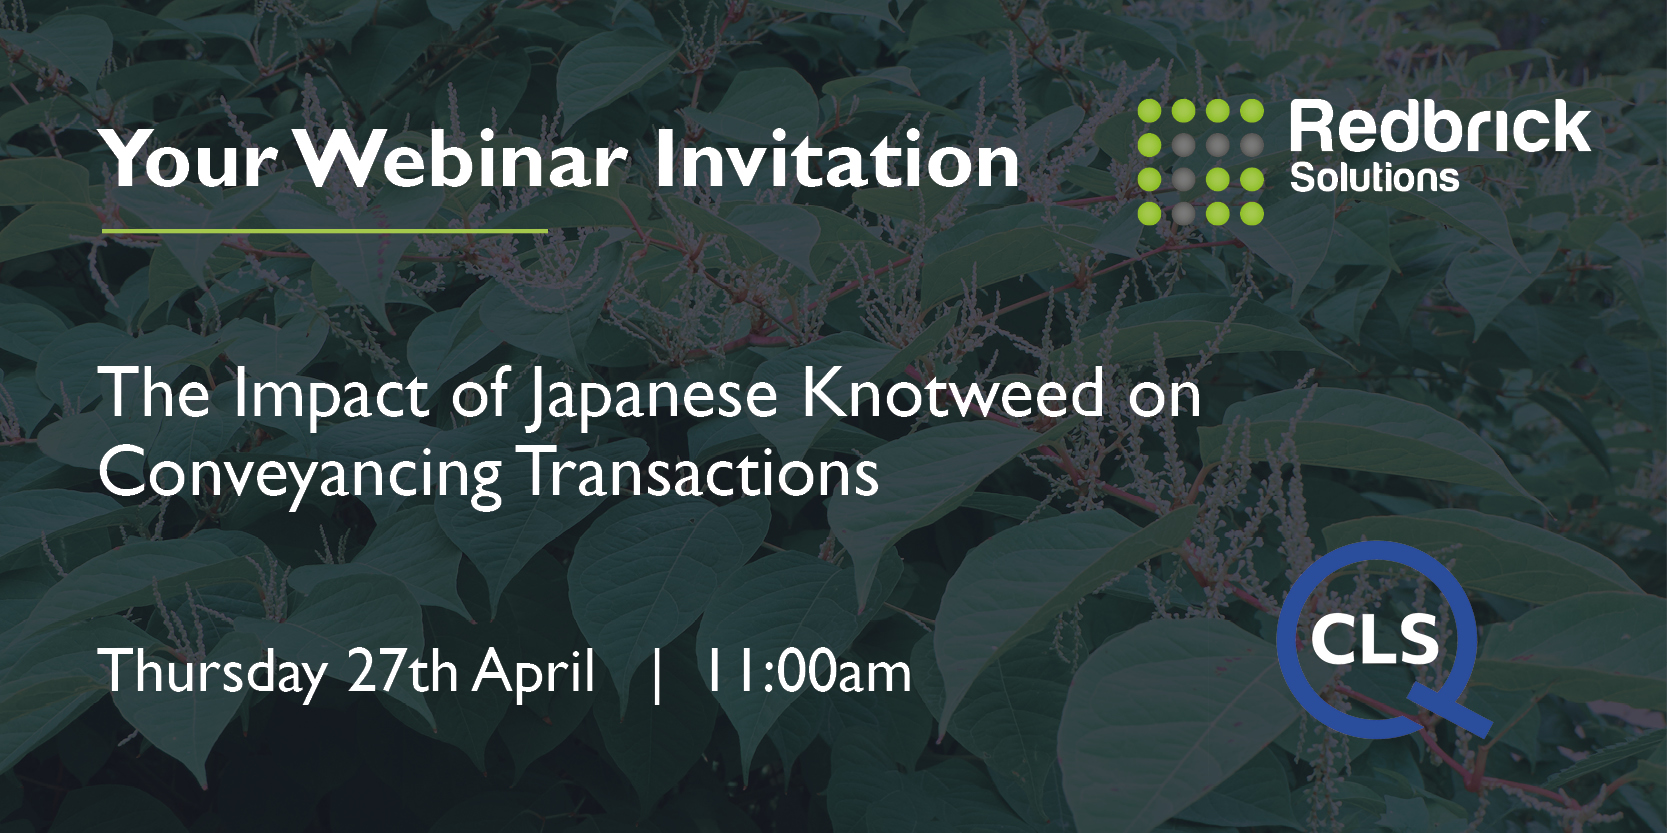 CLS Webinar | The Impact of Japanese Knotweed on Conveyancing Transactions